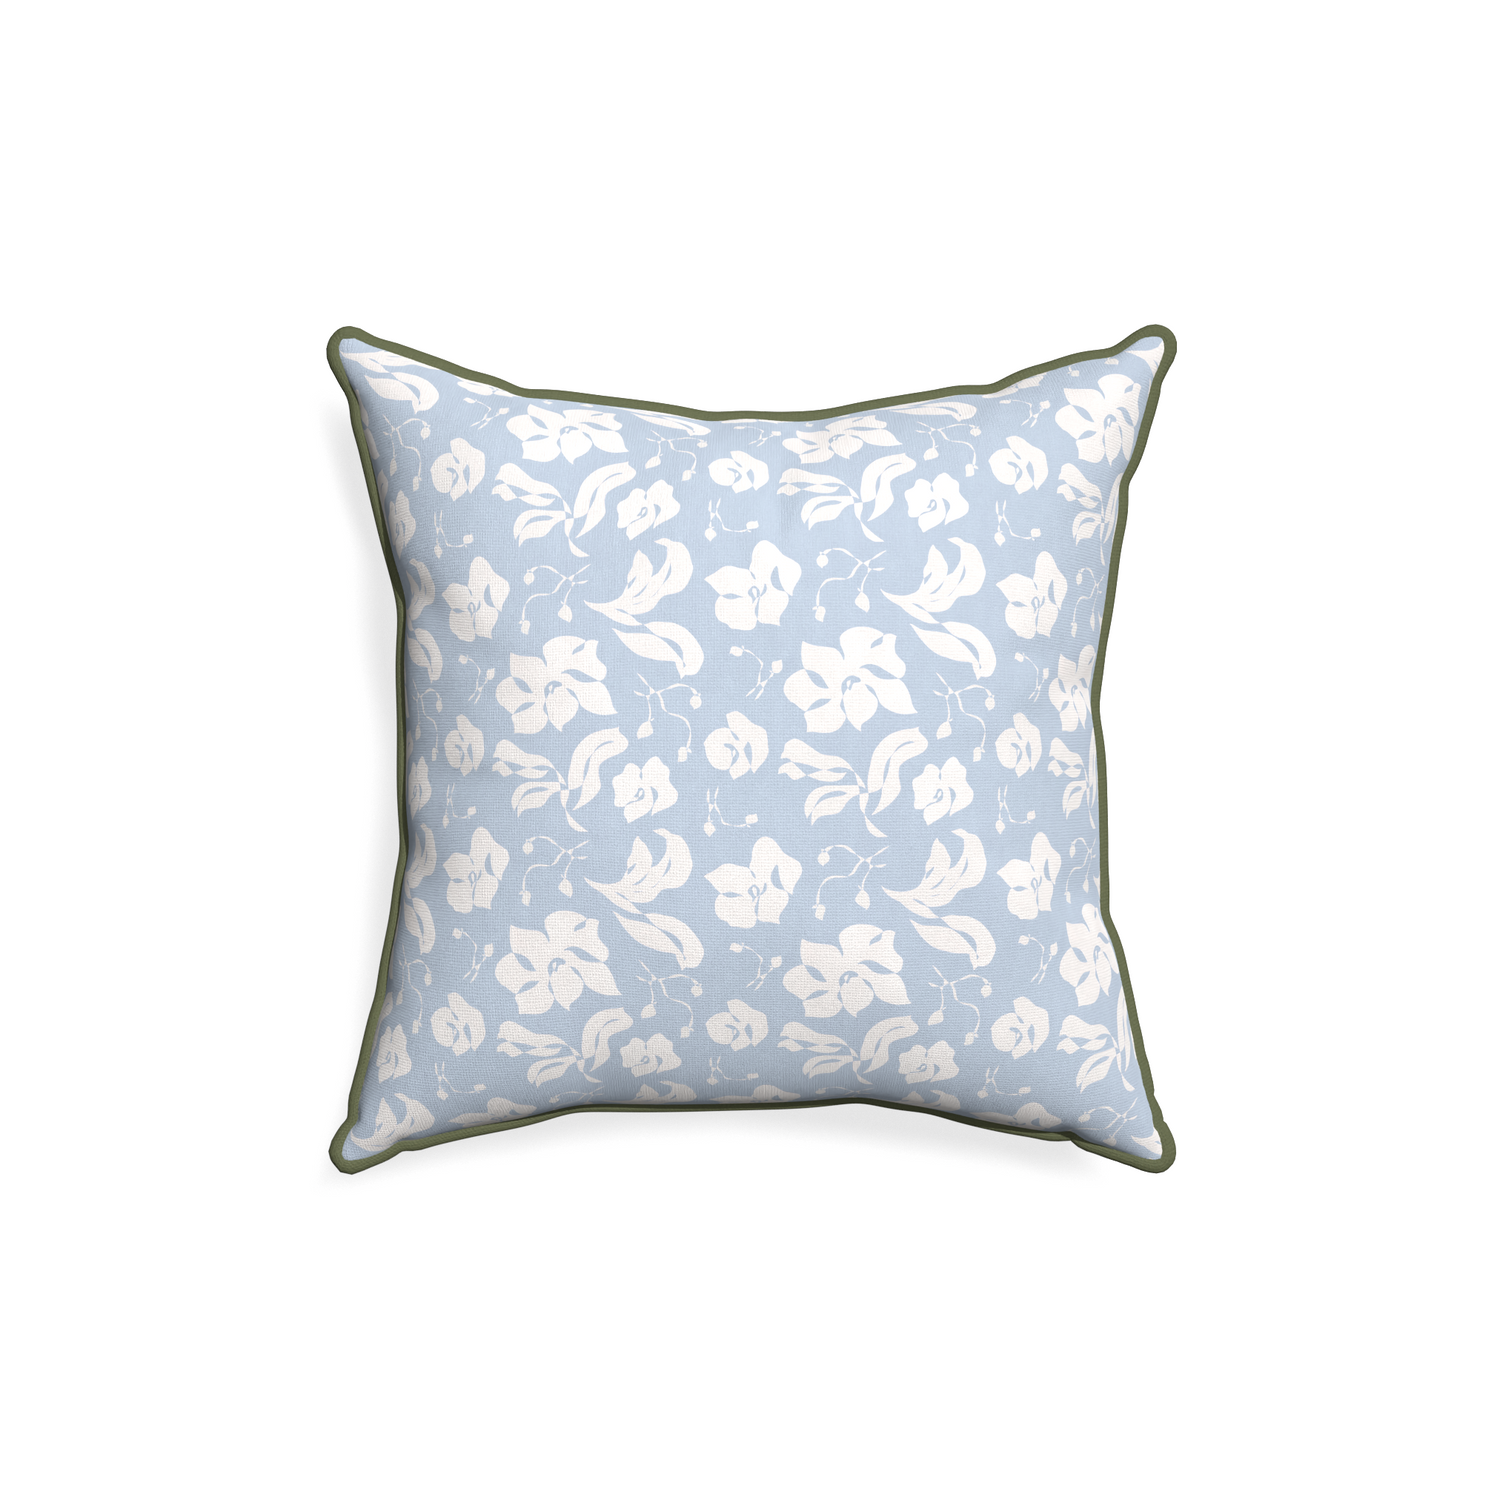 18-square georgia custom pillow with f piping on white background